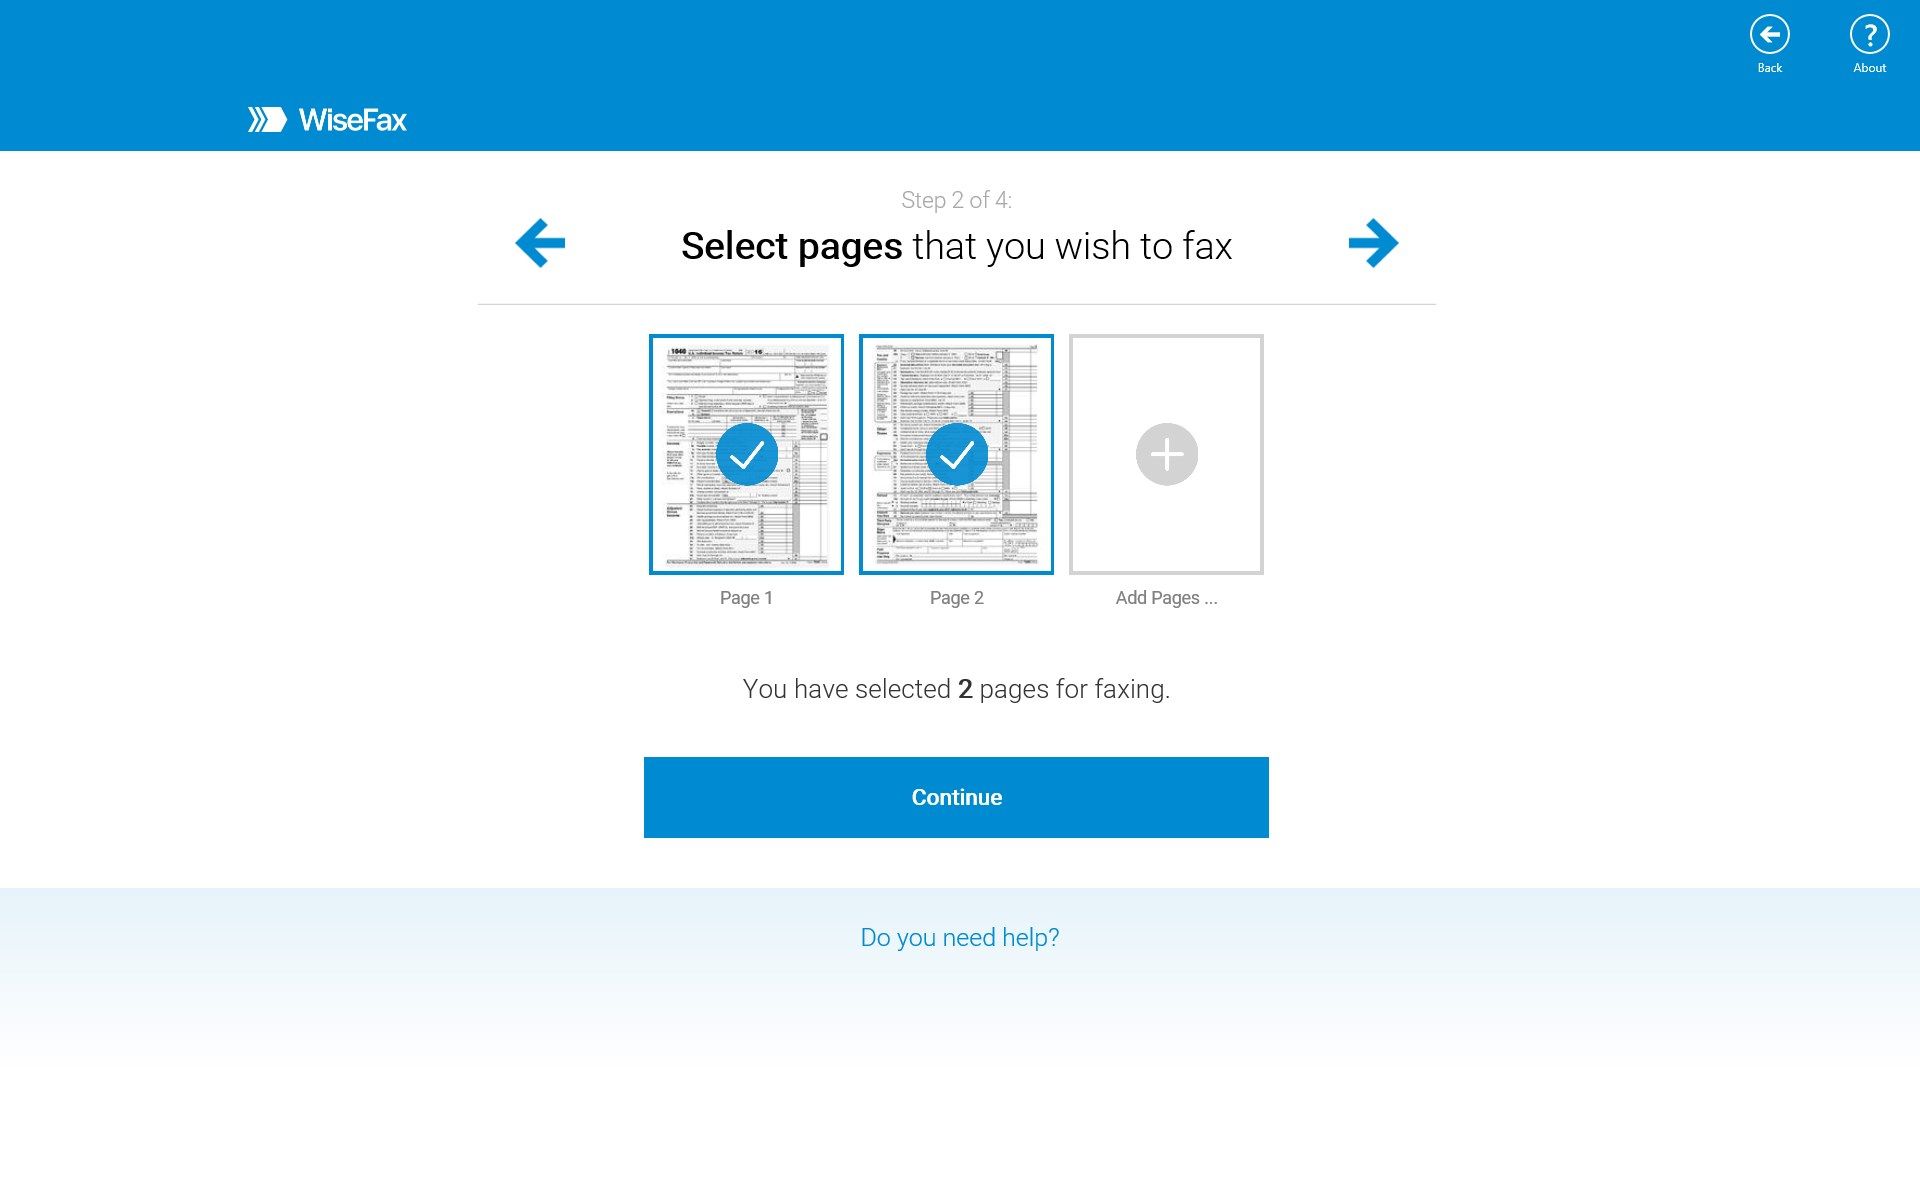 Step 2 - select pages